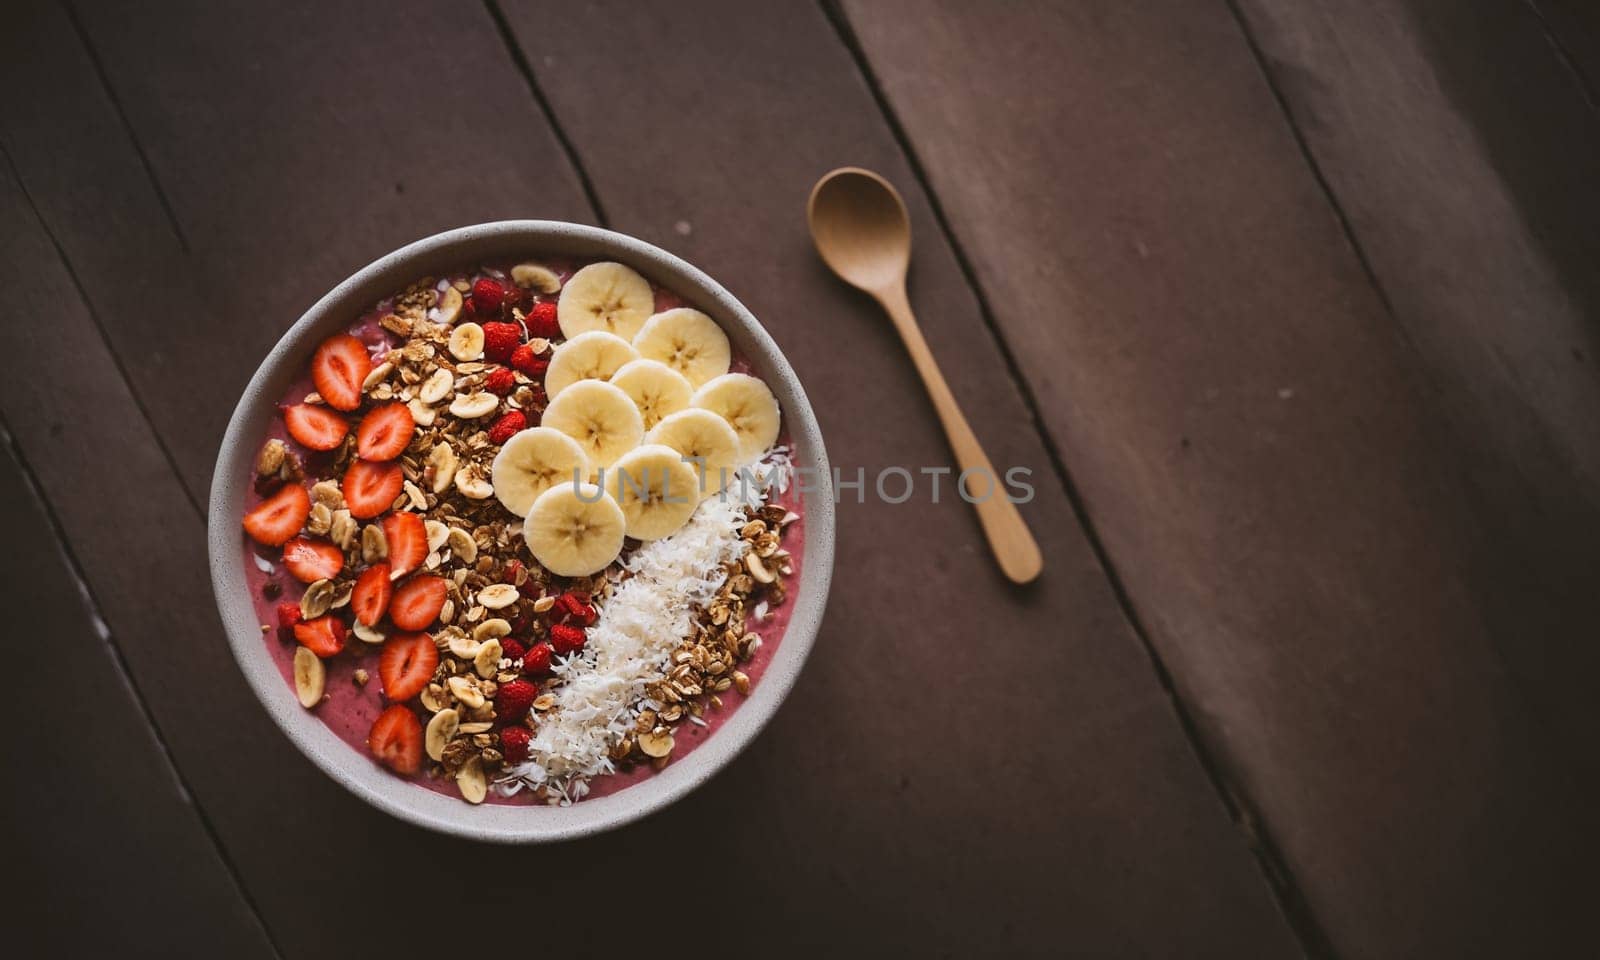 Nutritious Smoothie Bowl Delight by pippocarlot